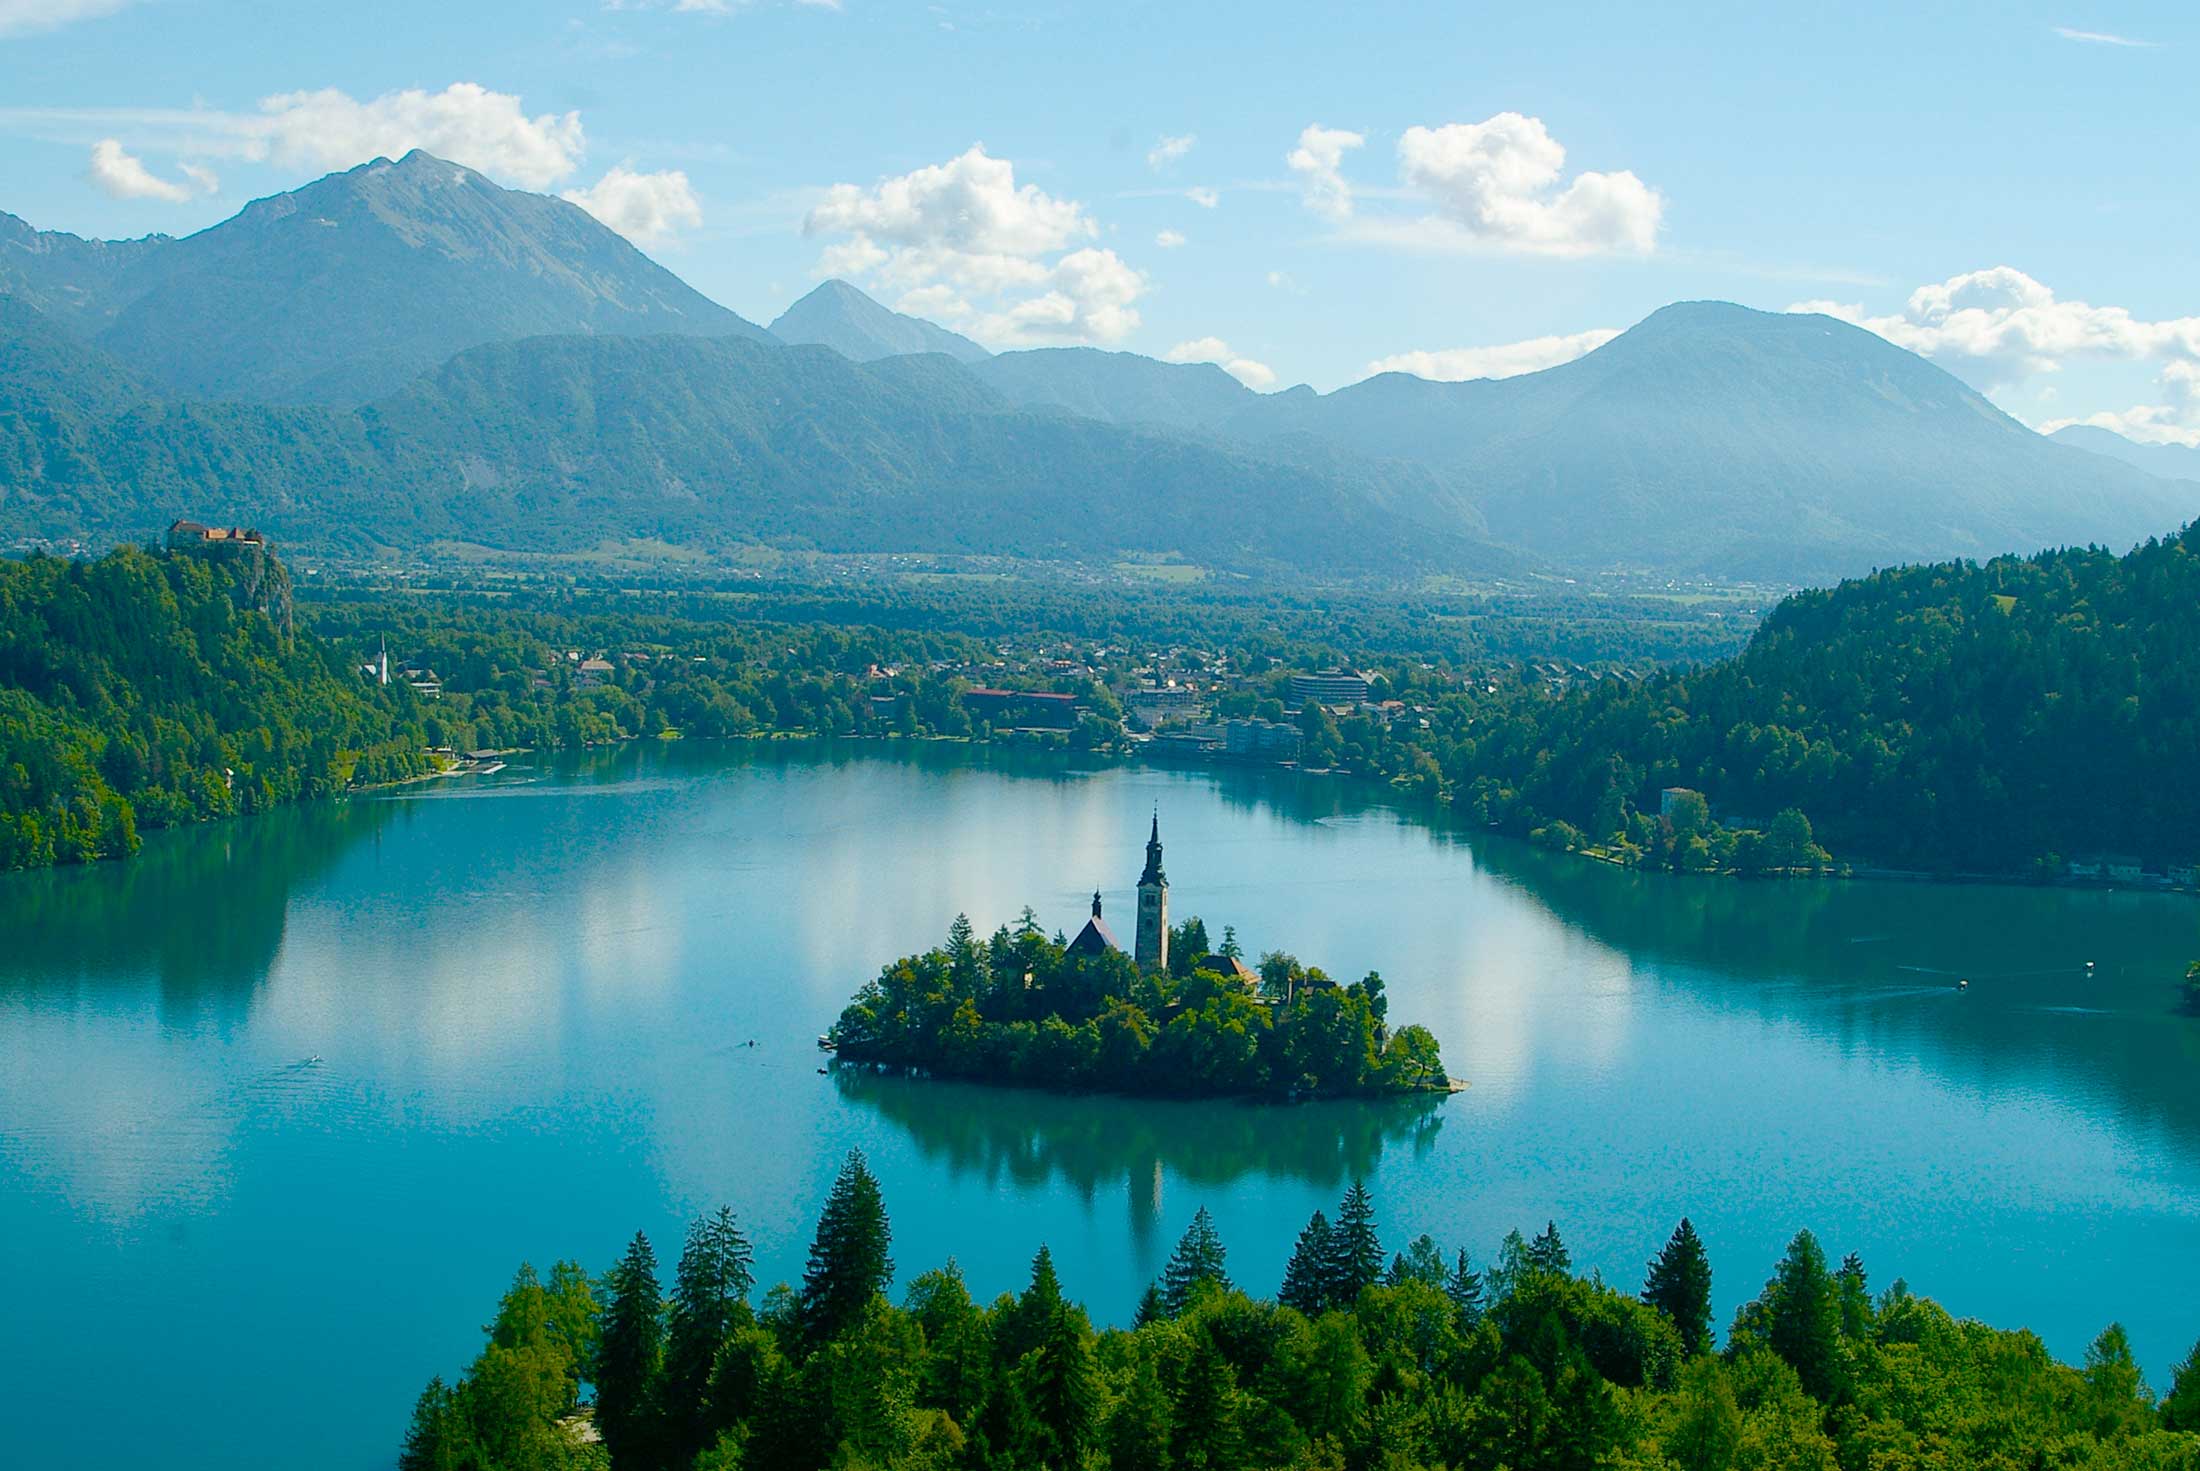 10 facty things about: Slovenia